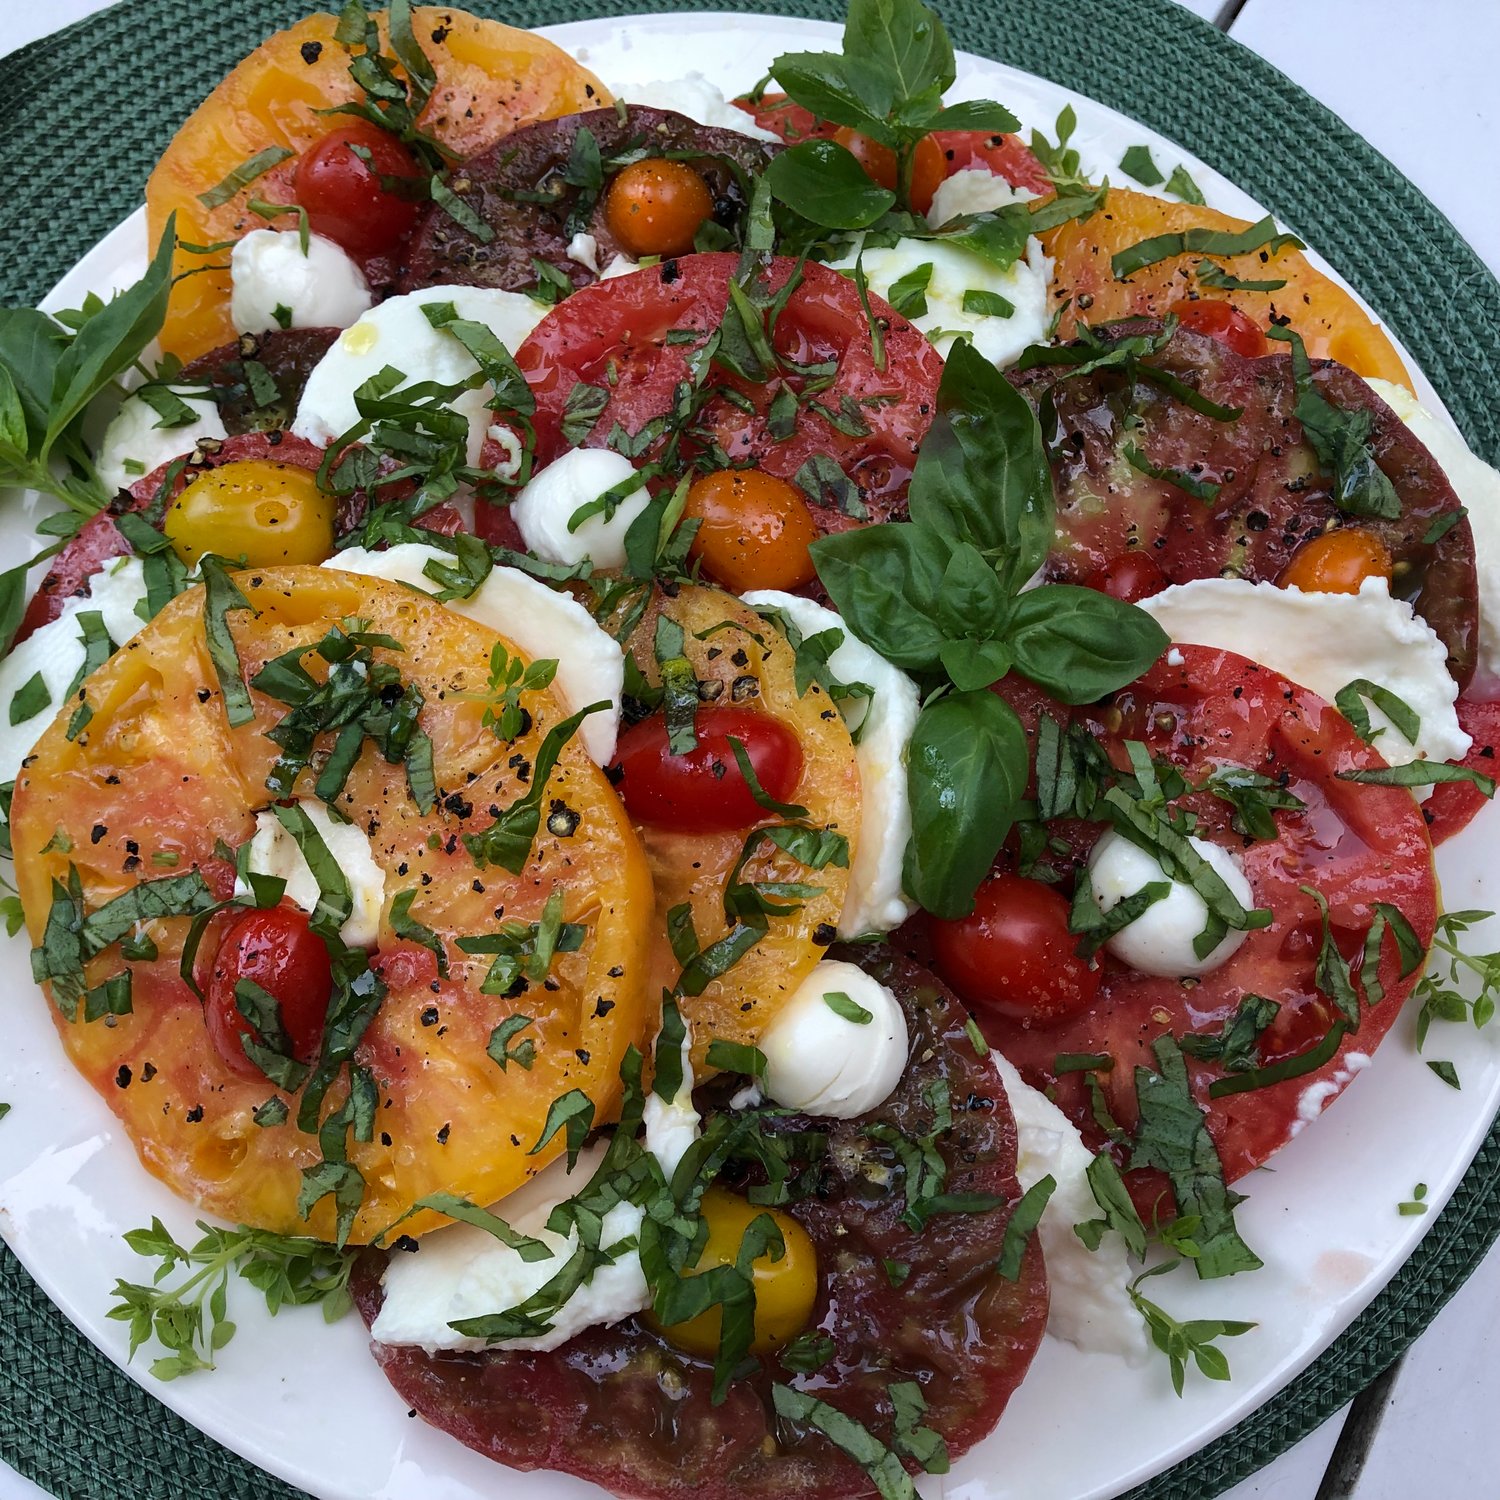 Unlike traditional Caprese Salads, this one is made with contrasting colors of heirloom tomatoes and two varieties of mozzarella cheese.